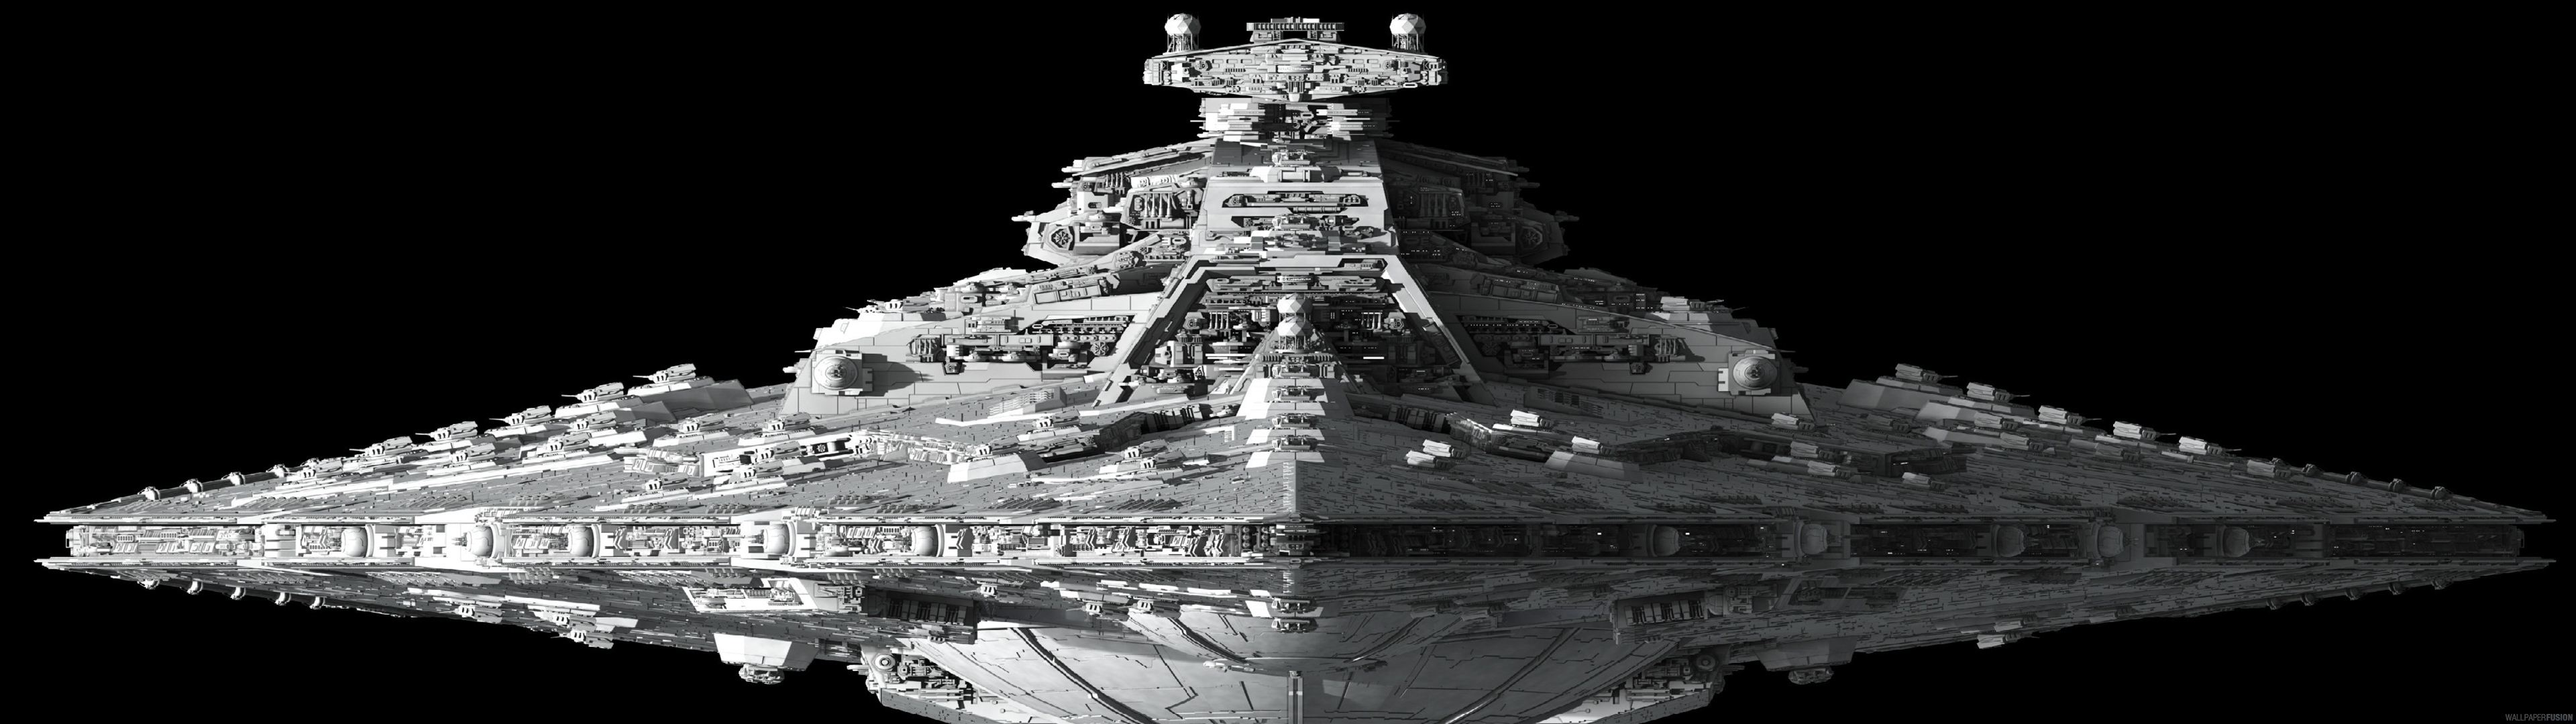 dual monitor star destroyer wallpaper   Comment 136 added by